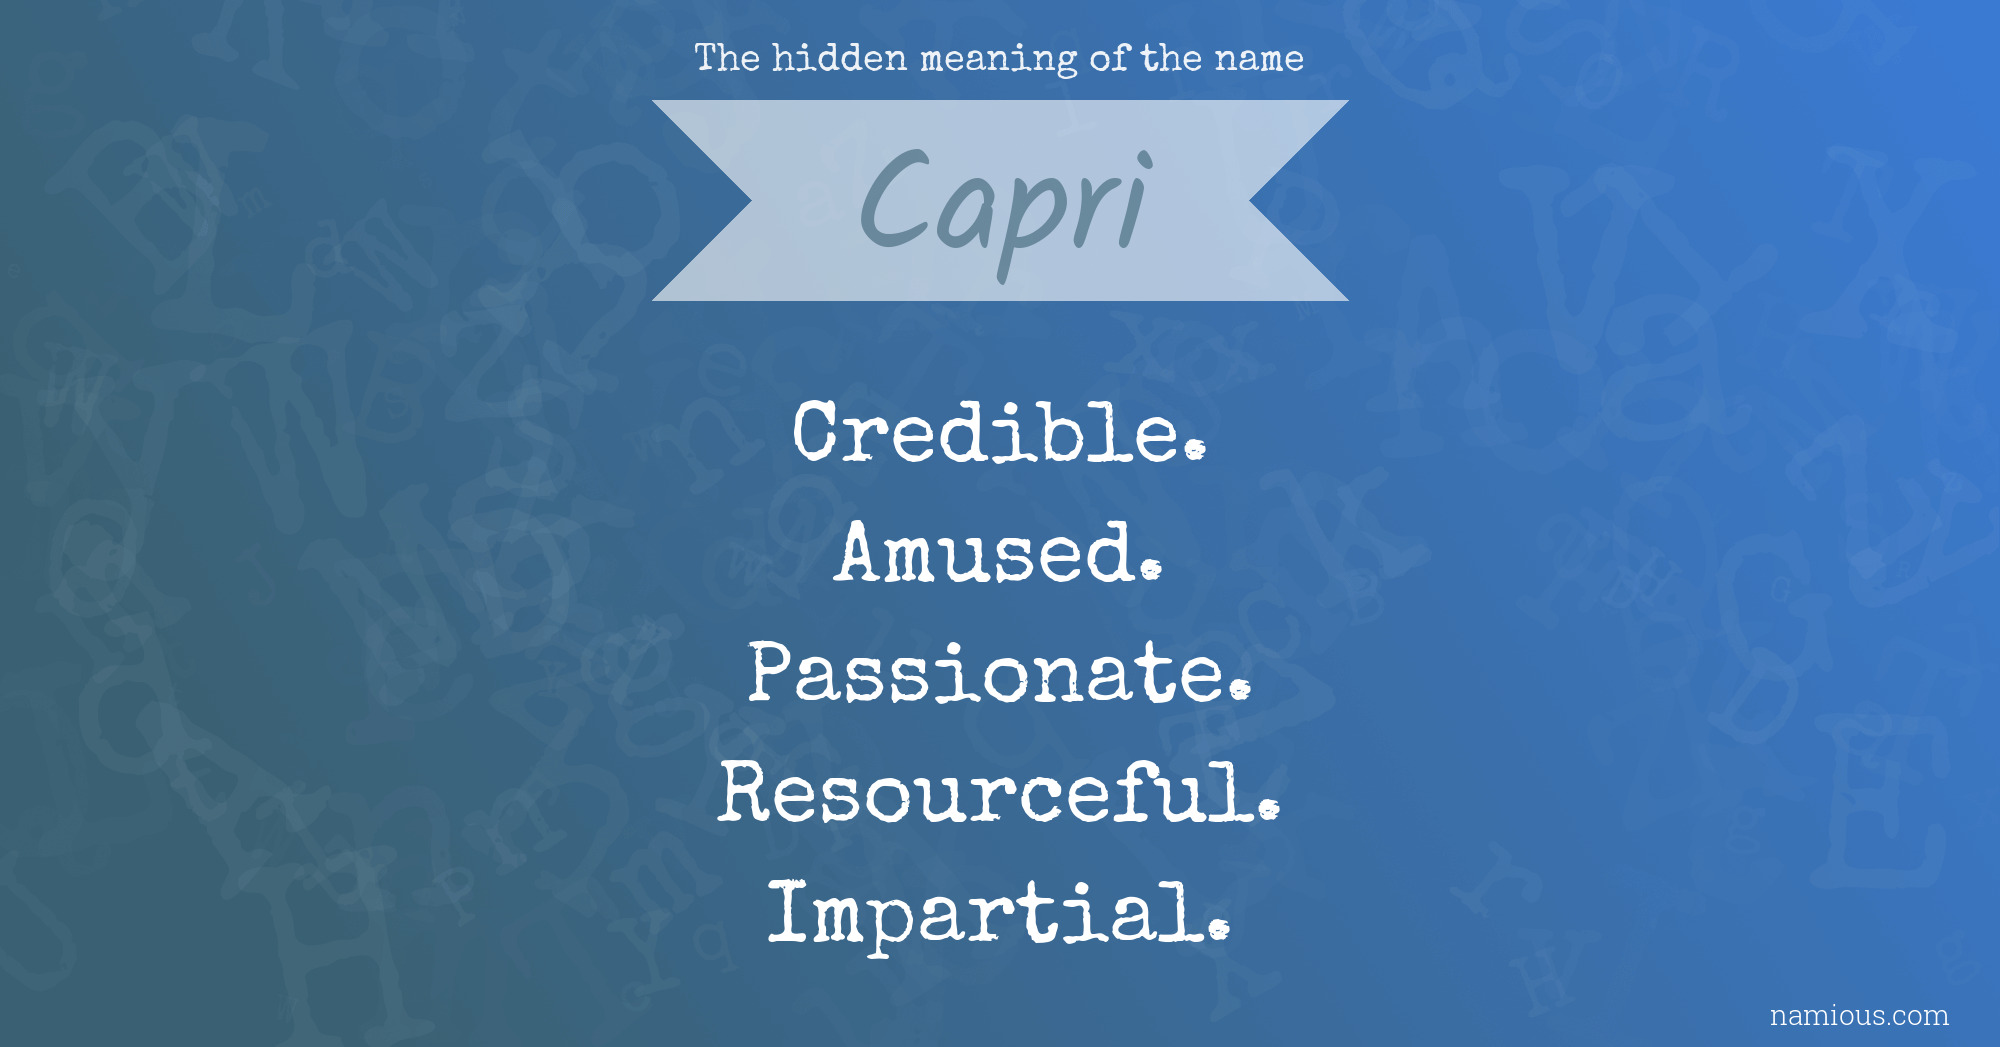 The hidden meaning of the name Capri